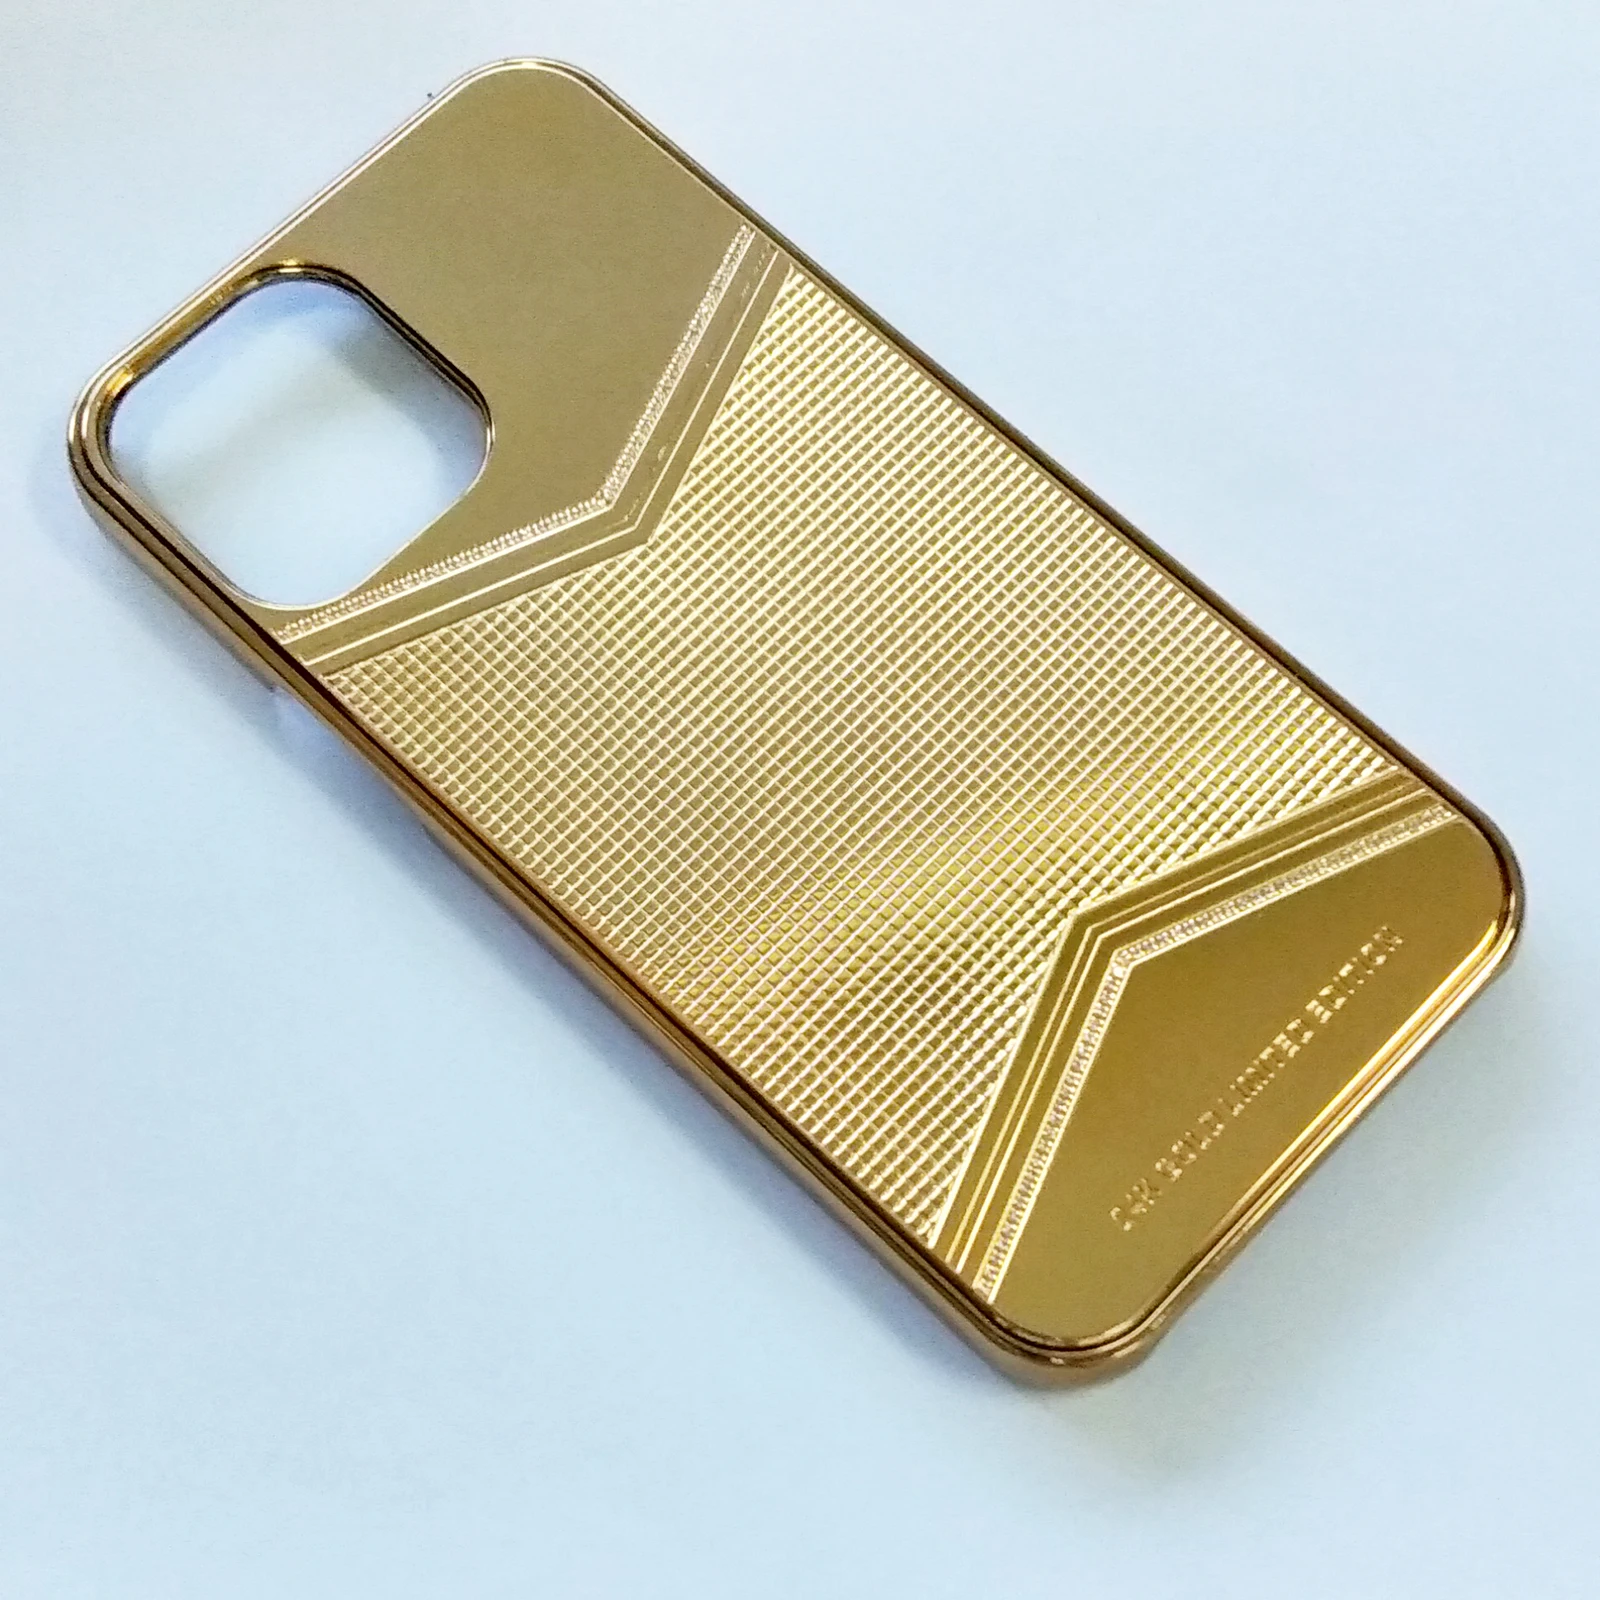 Phone Case Cover For Apple Iphone 12 Pro 12 Pro Max Customized Design 24k Gold Plated Iphone Protective Case Buy For Iphone 12 Pro 12 Pro Max Protective Case Cover Gold Plated Custom Protective Case